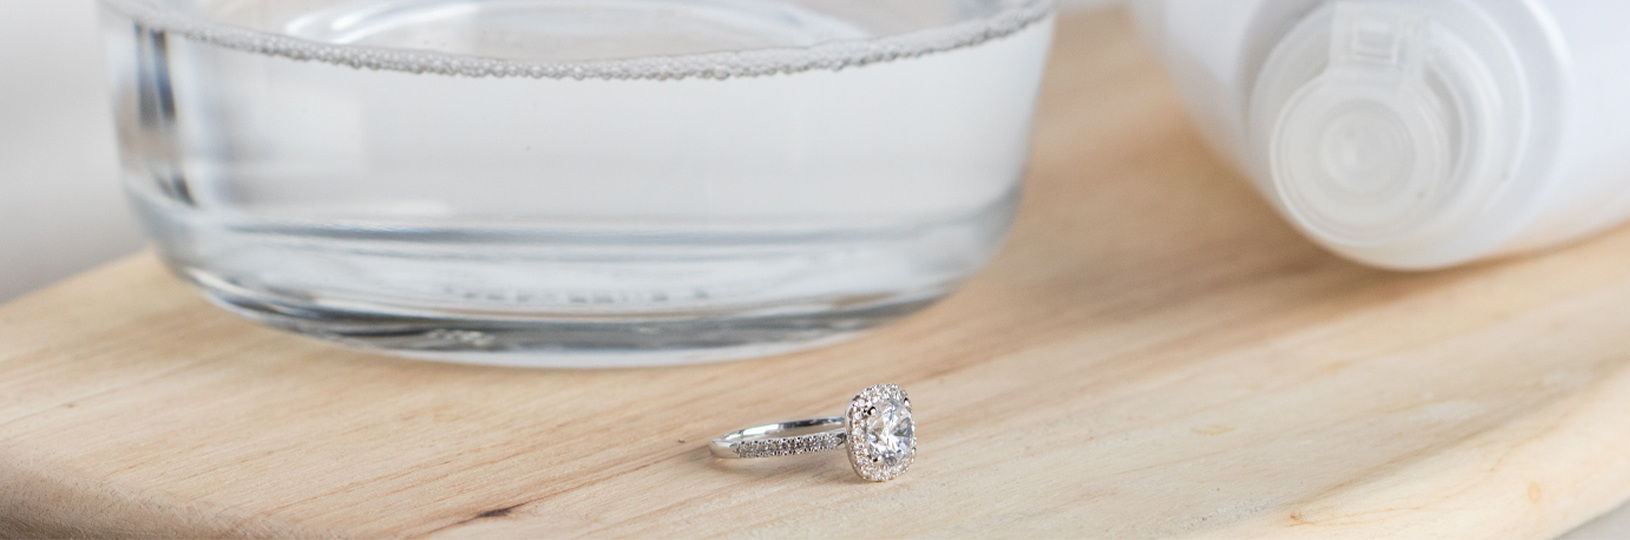 How to Clean a Diamond Ring: Expert Tips by Metal Type